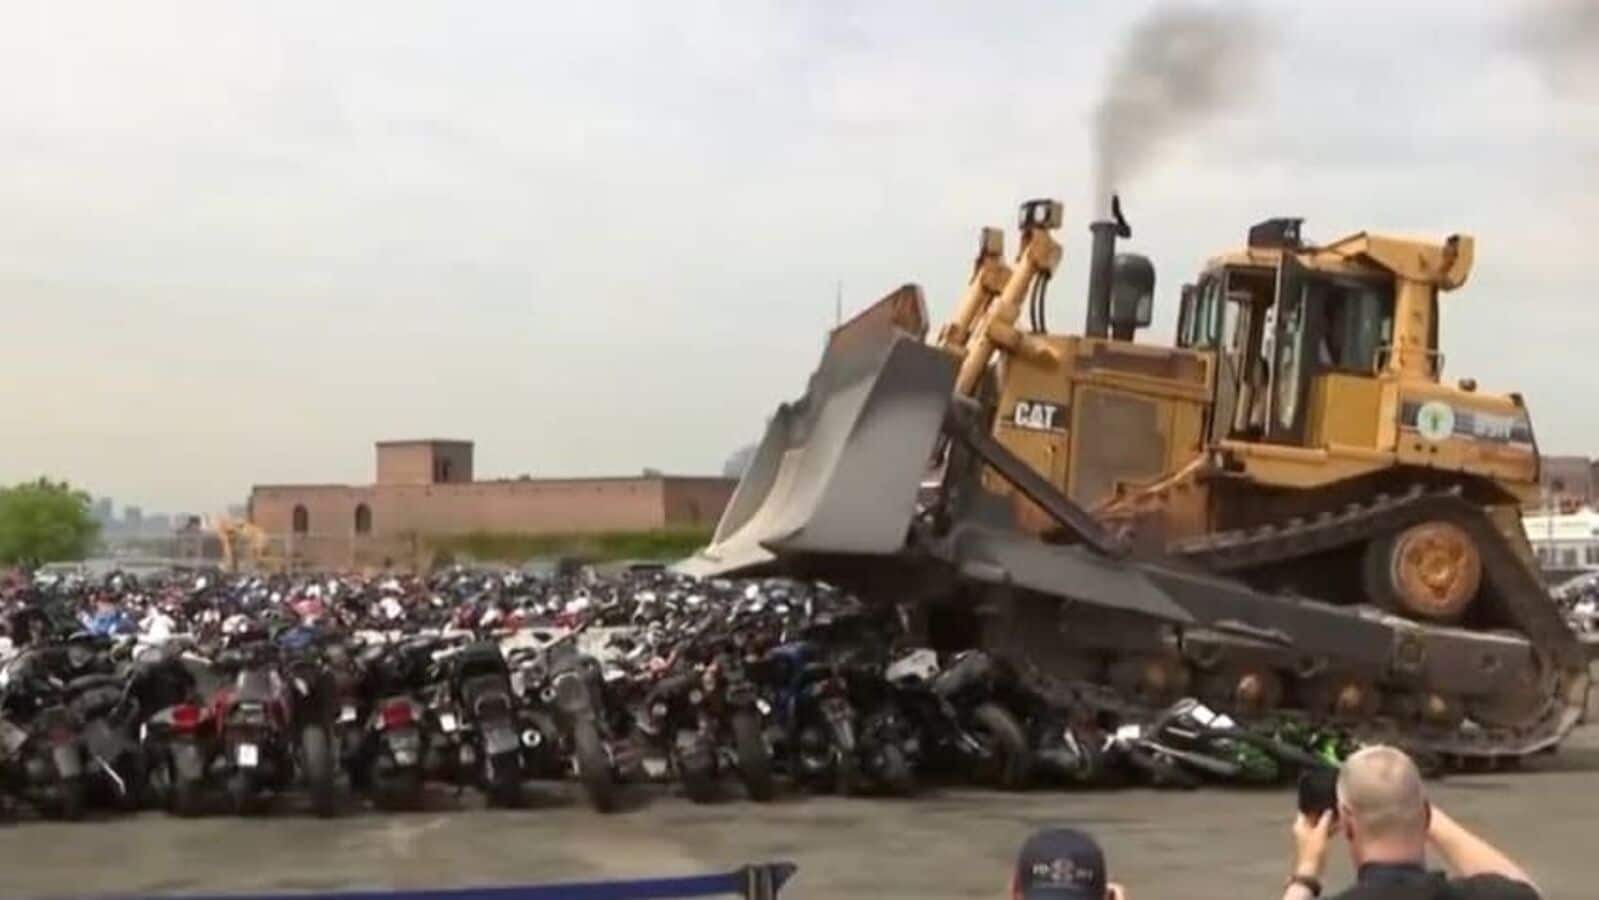 Watch: Hundreds of illegal dirt bikes and ATVs bulldozed in New York